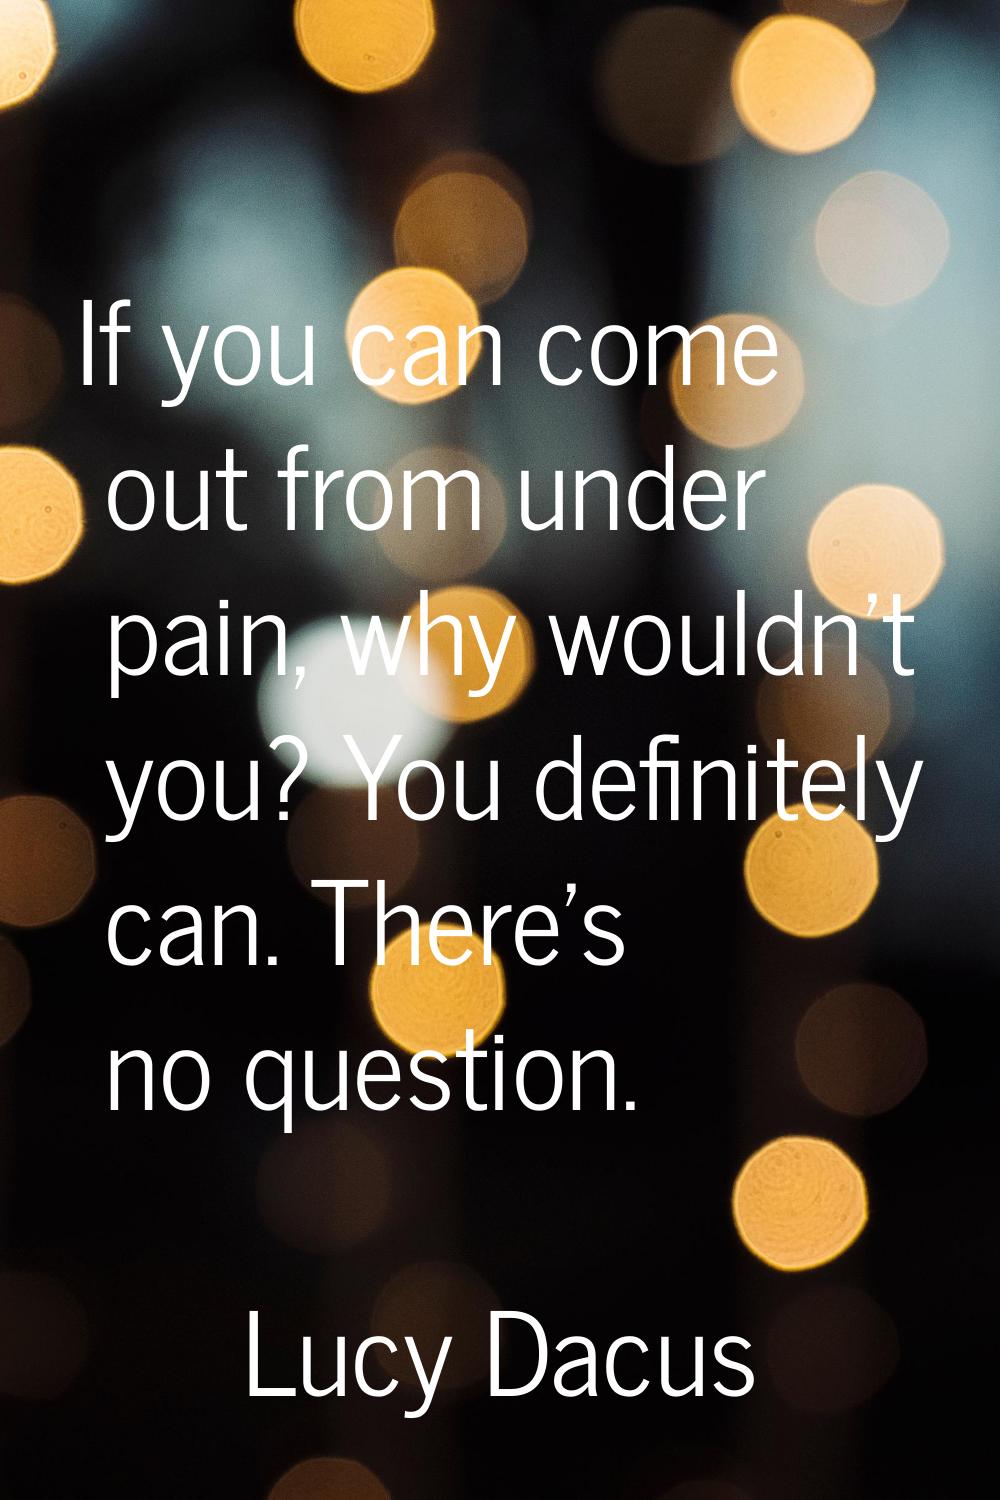 If you can come out from under pain, why wouldn't you? You definitely can. There's no question.